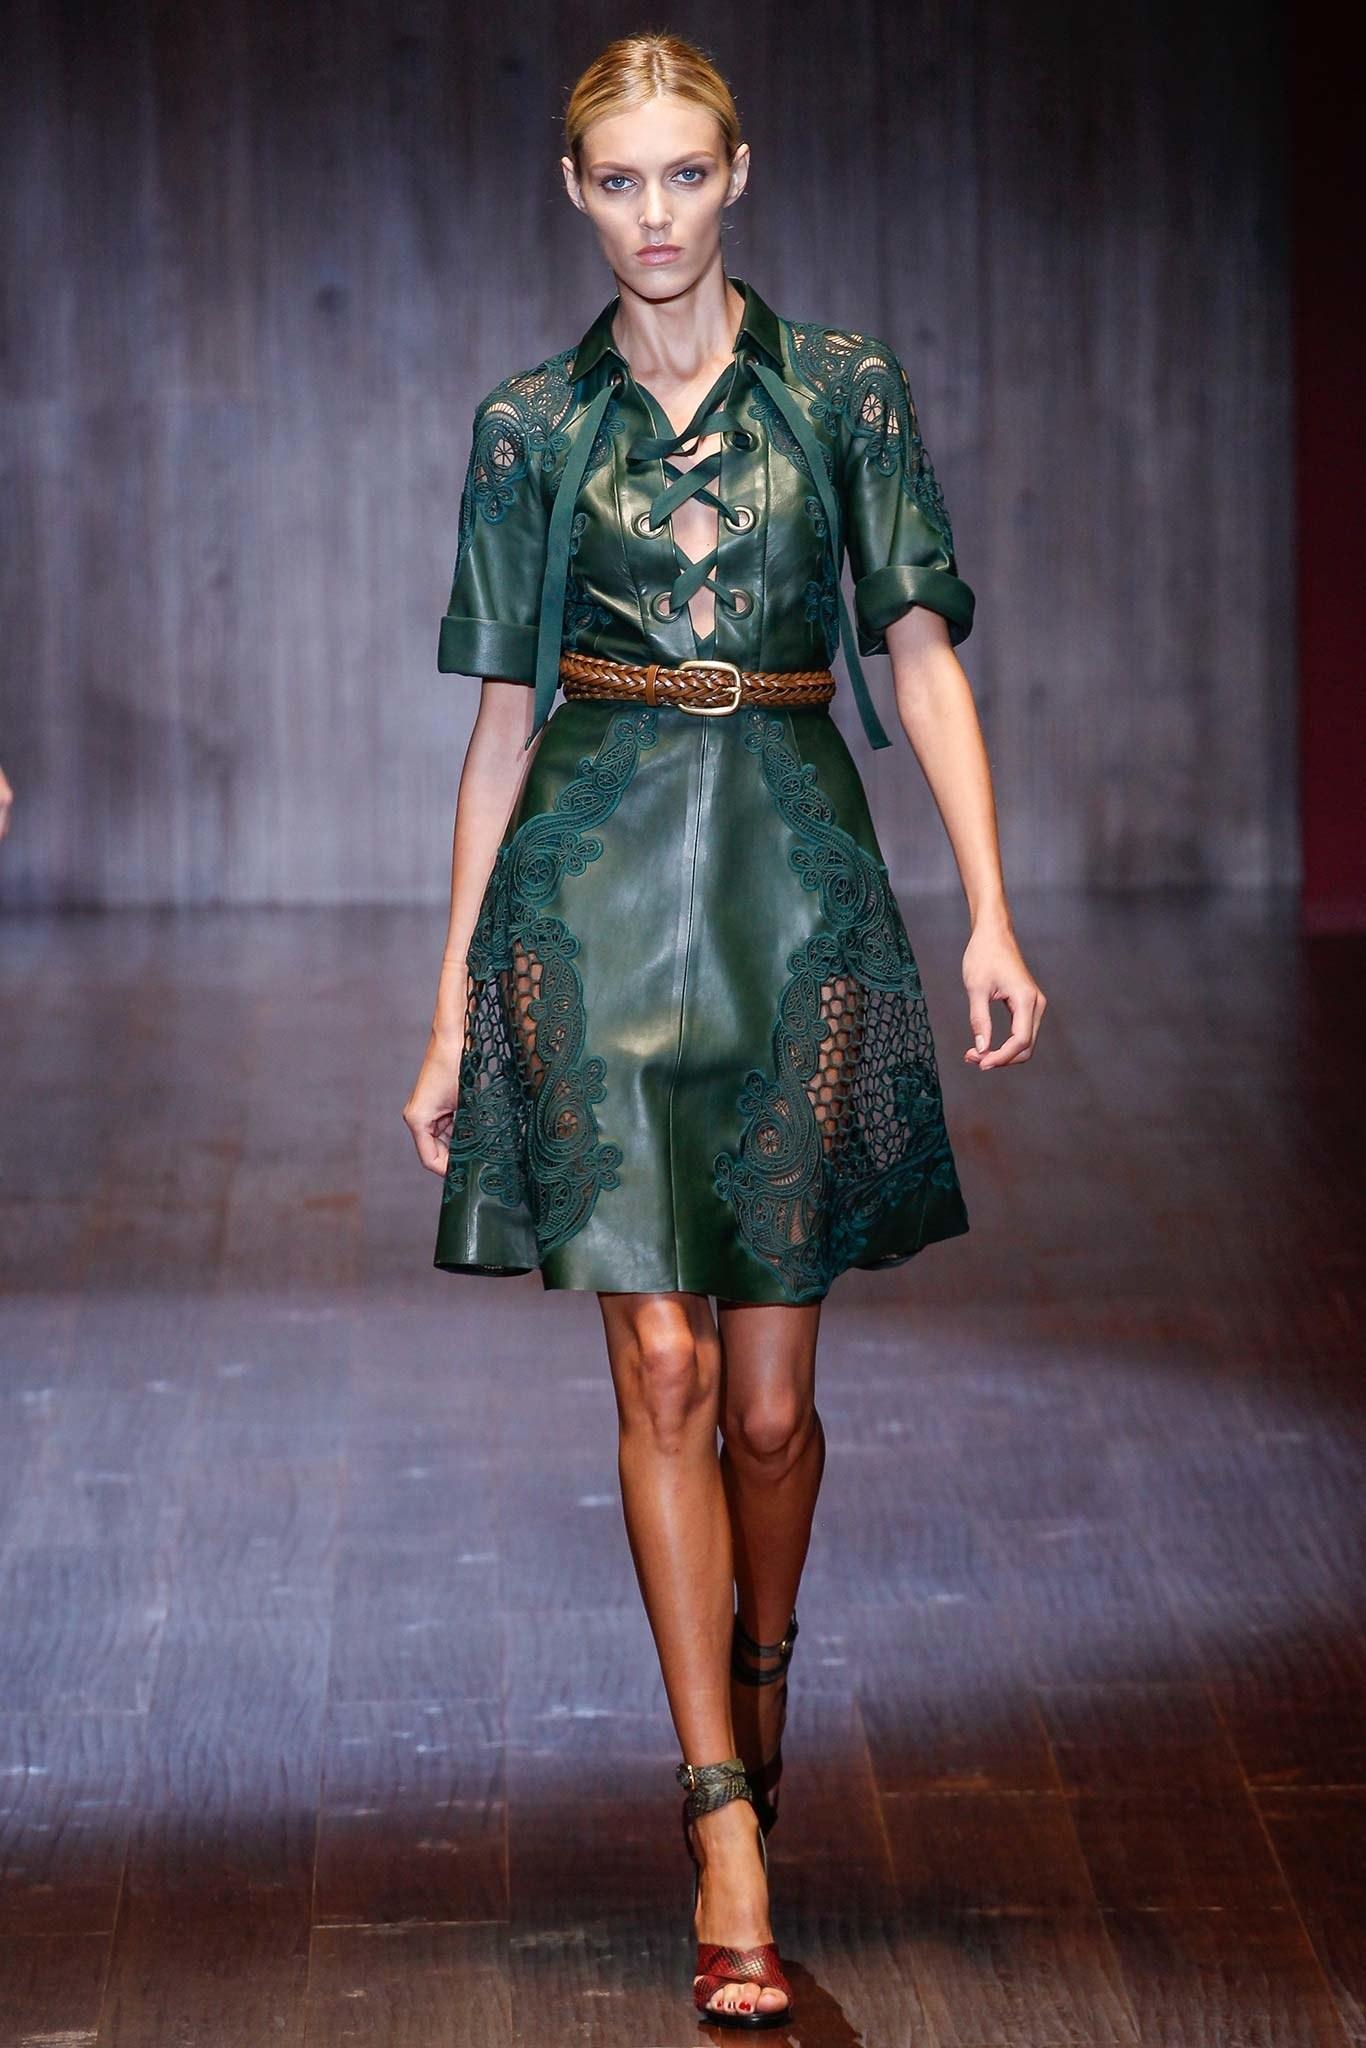 Gucci Spring 2015 dress comes in supple green leather with a pointed collar, ribbon lace up V neck front with covered grommets, short, cuffed sleeves, and broderie anglaise lace cutouts panels. Made in Italy. Retailed at $8400.00

V. Good Pre-Owned